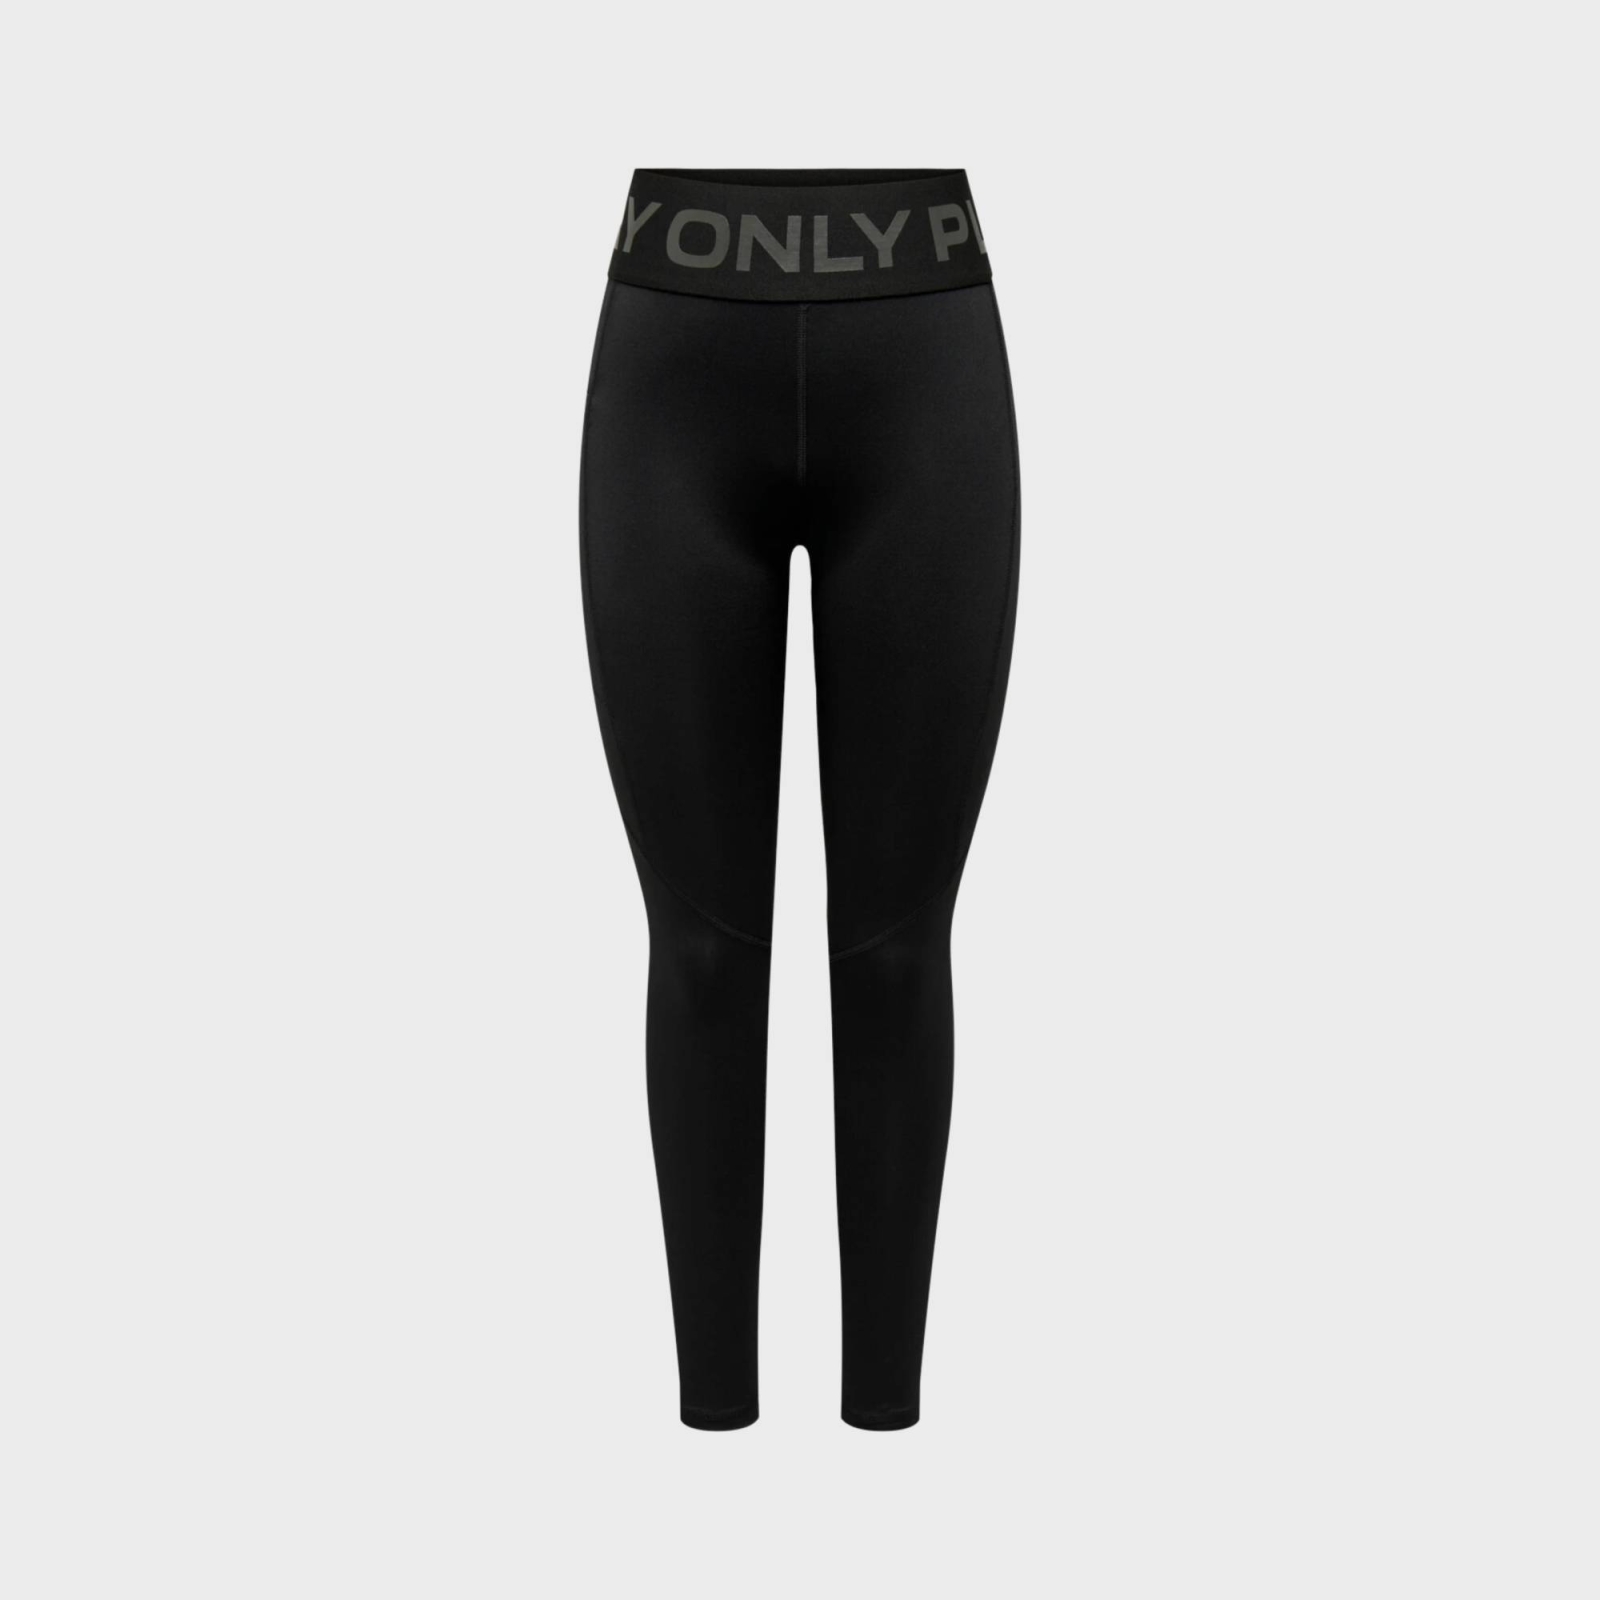 ONLY PLAY GILPALLY1 HIGH WEIST TRAIN TIGHTS